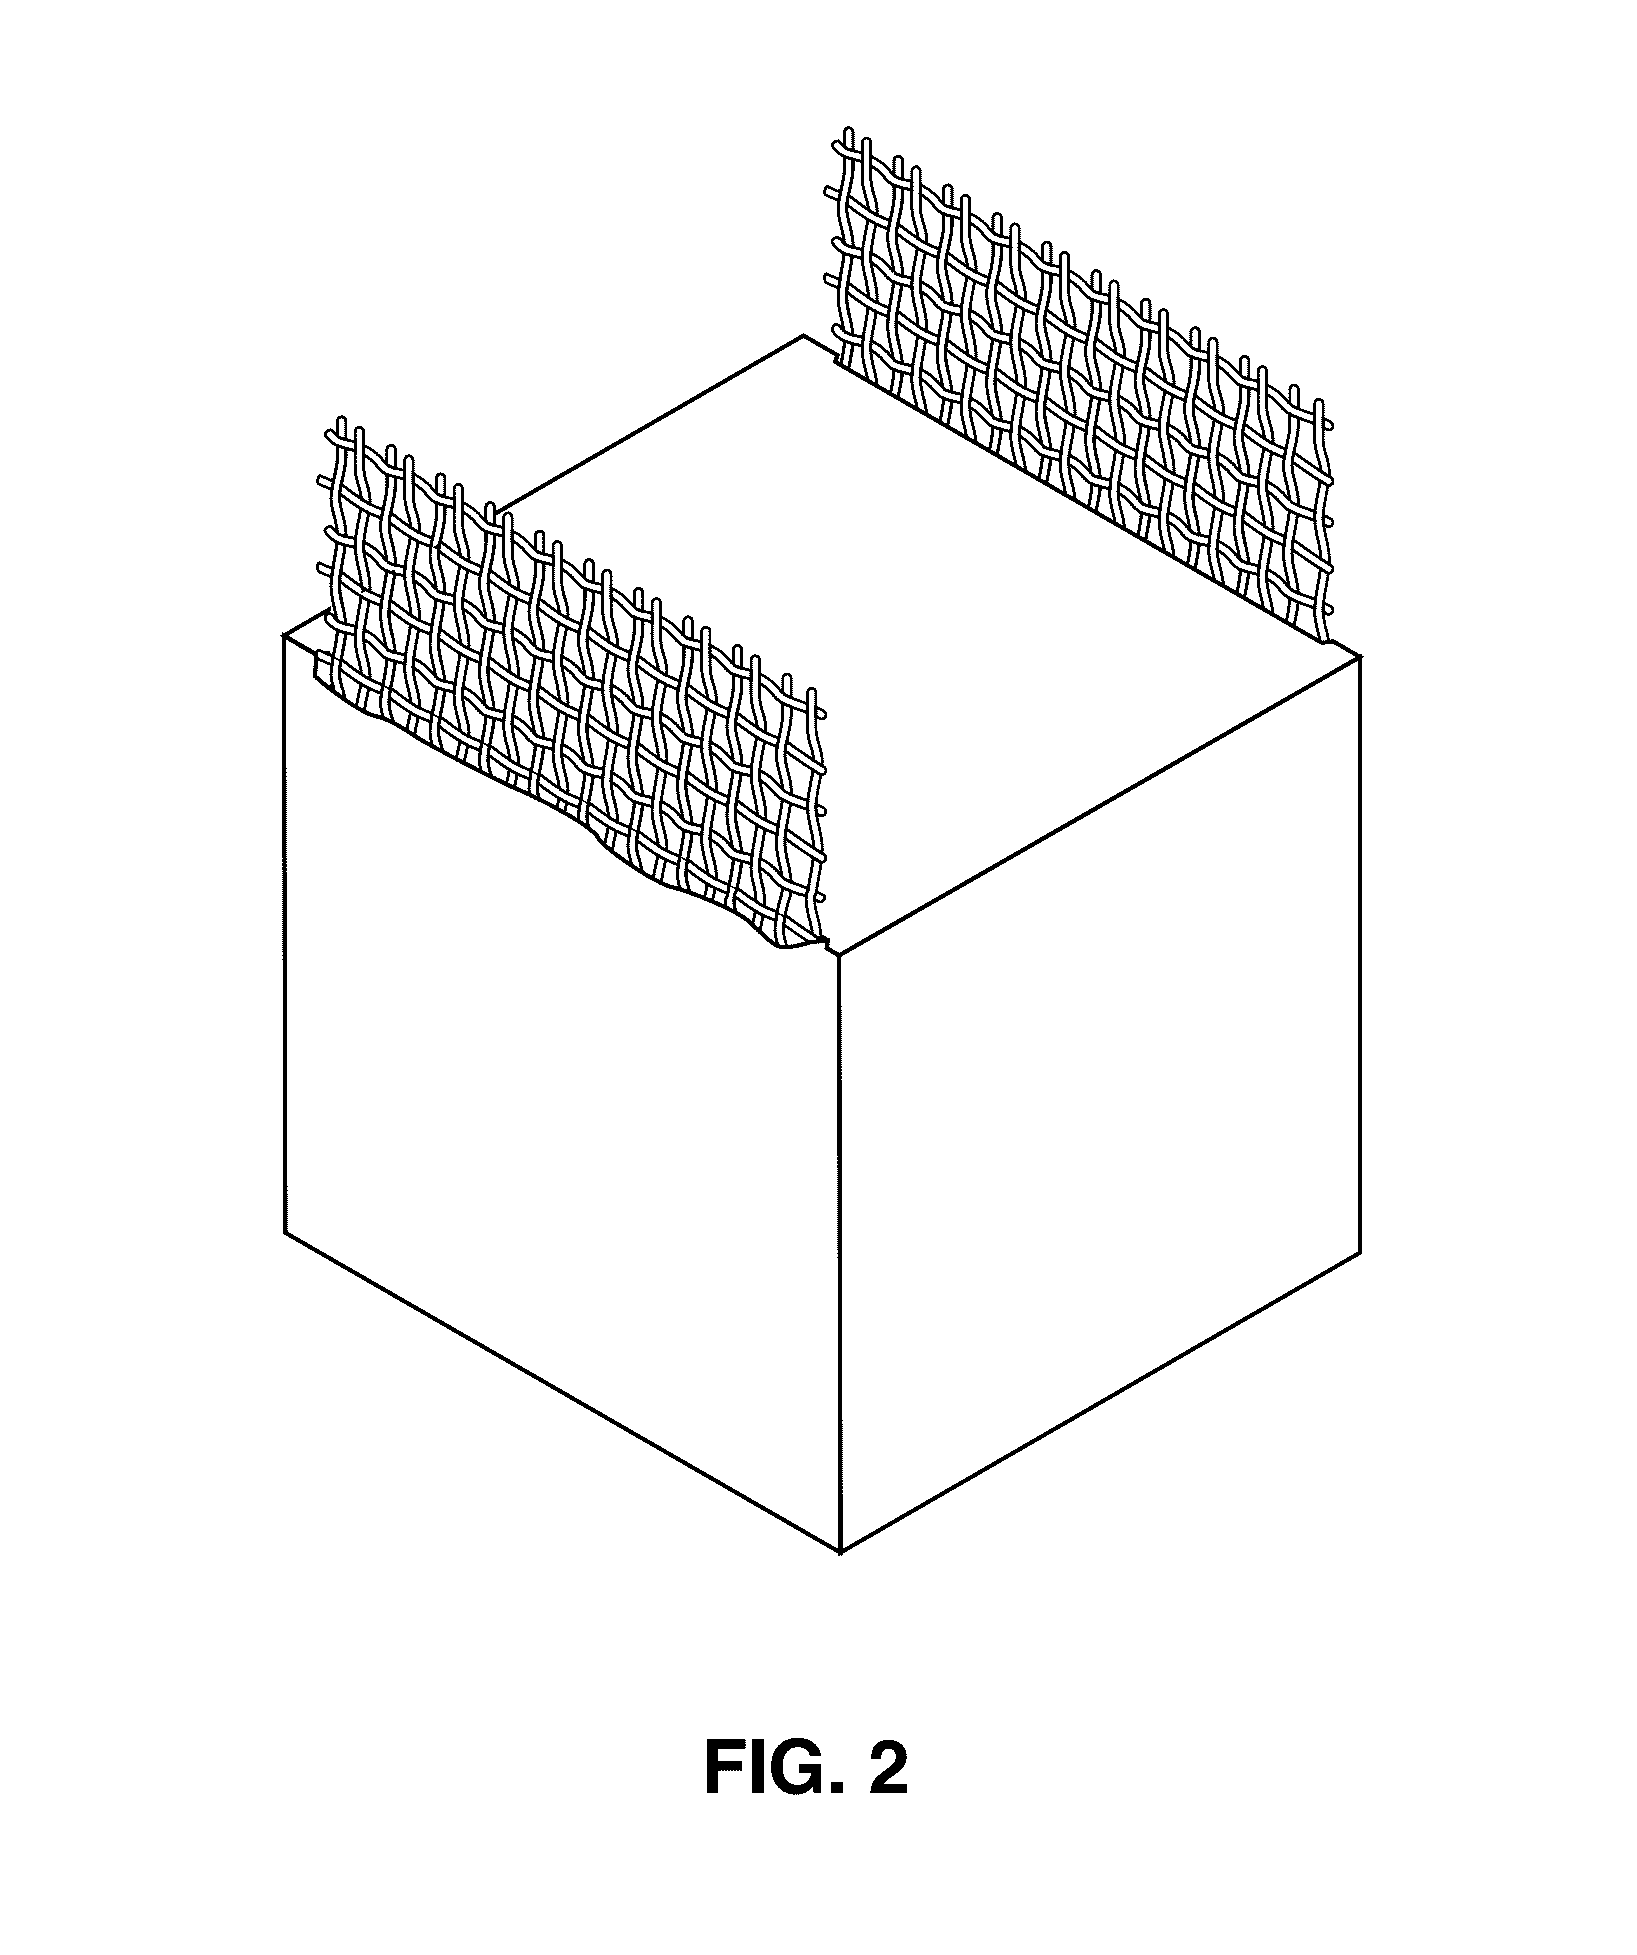 Multifunctional cement composites with load-bearing and self-sensing properties